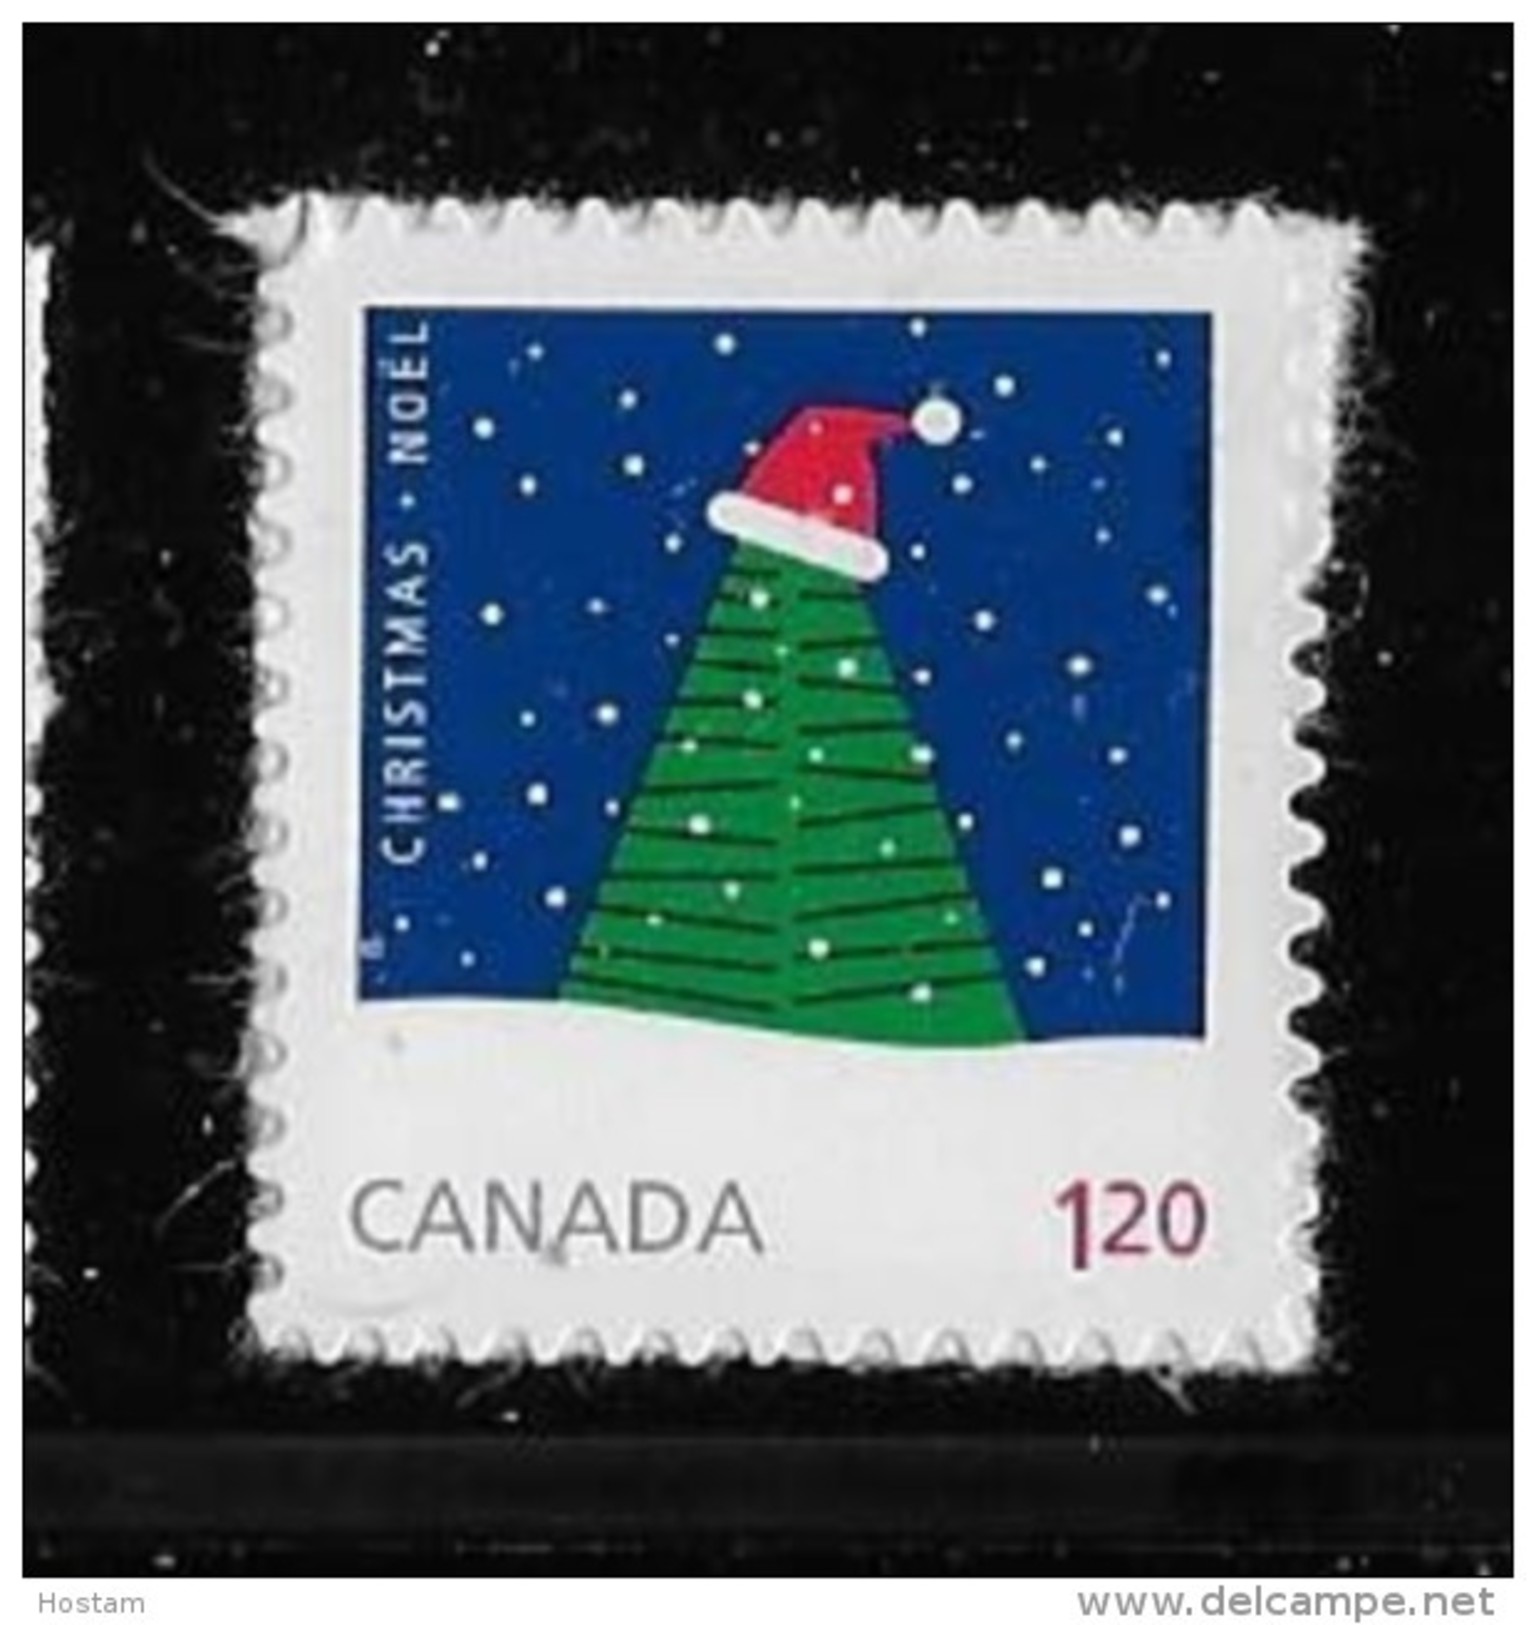 CANADA 2016, #2957   CHRISTMAS   TREE  With SANTA  HAT  Single   USA  Rate Stamp MNH - Single Stamps